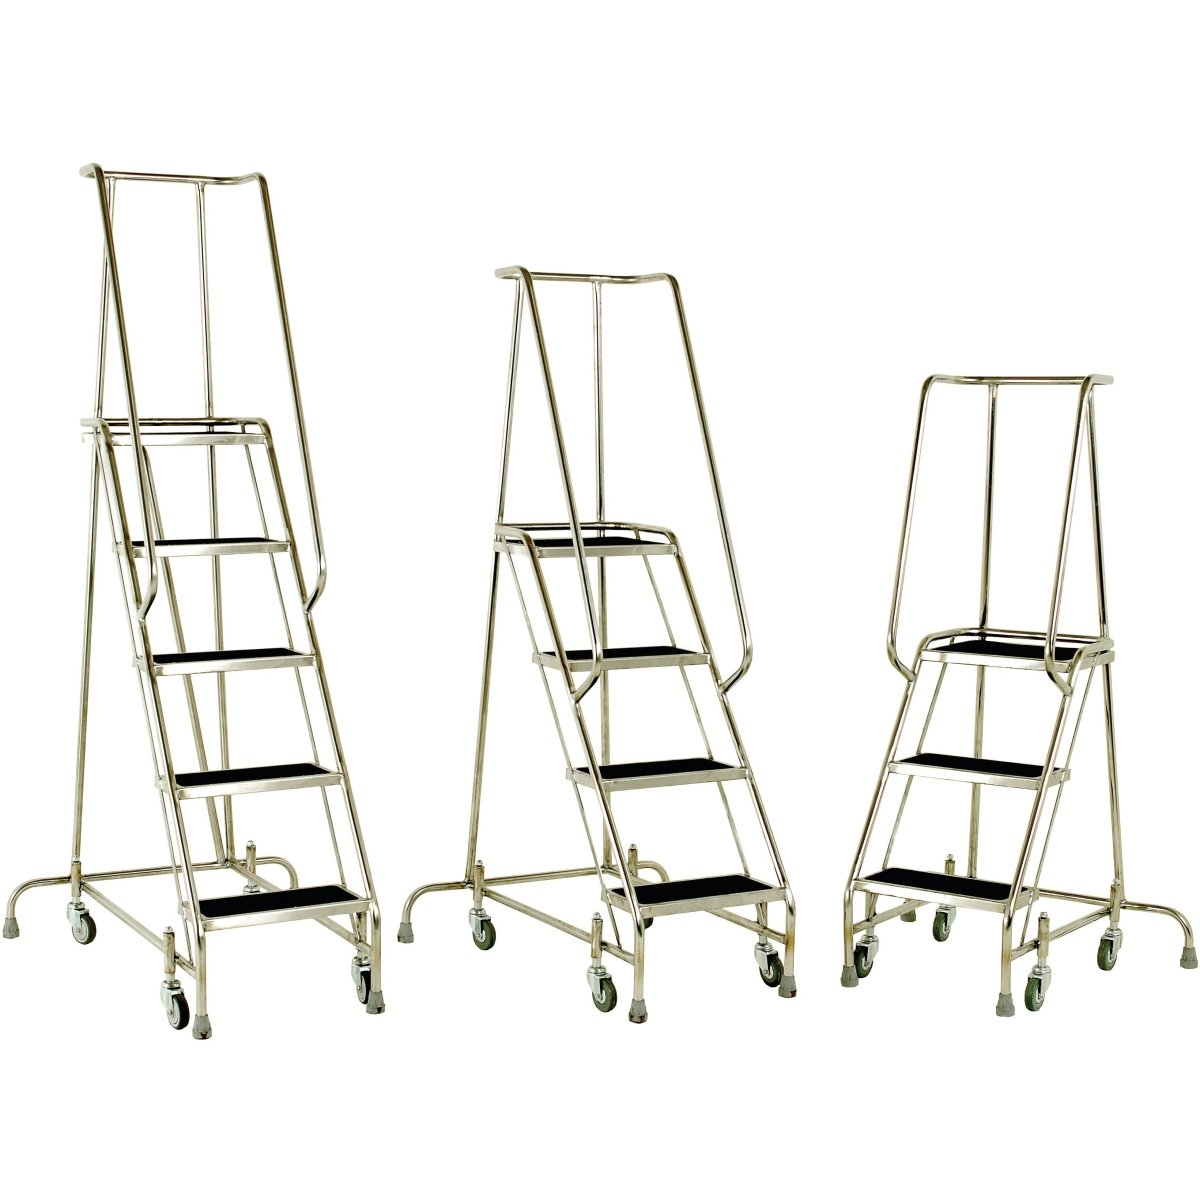 Stainless Steel 3, 4 & 5 Mobile Step Unit - Warehouse Storage Products